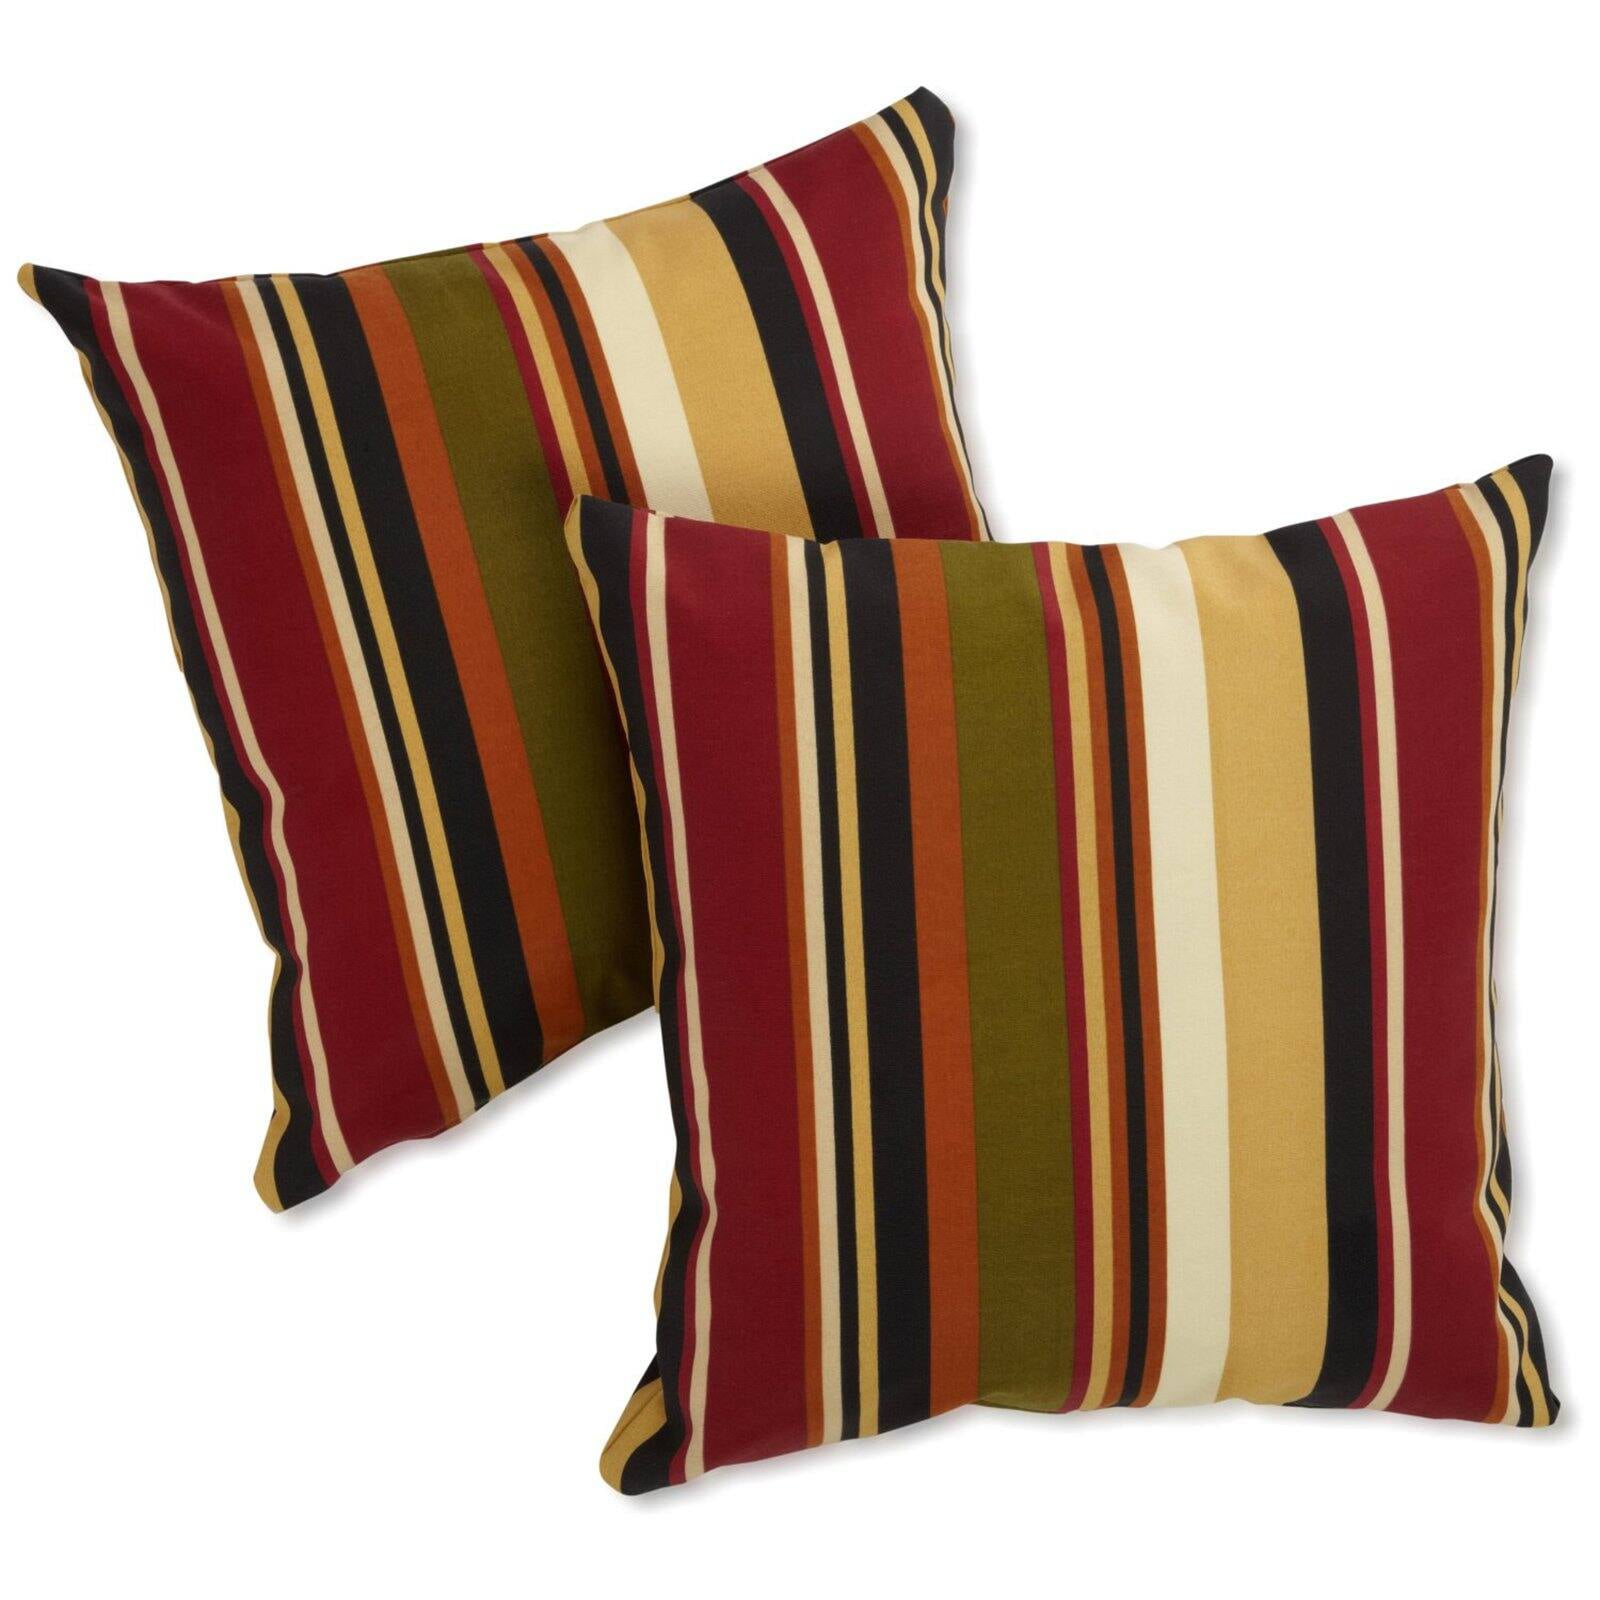 Picture of Blazing Needles 9913-S2-REO-17 Spun Polyester Outdoor Floor Pillows, Kingsley Stripe Ruby - Set of 2